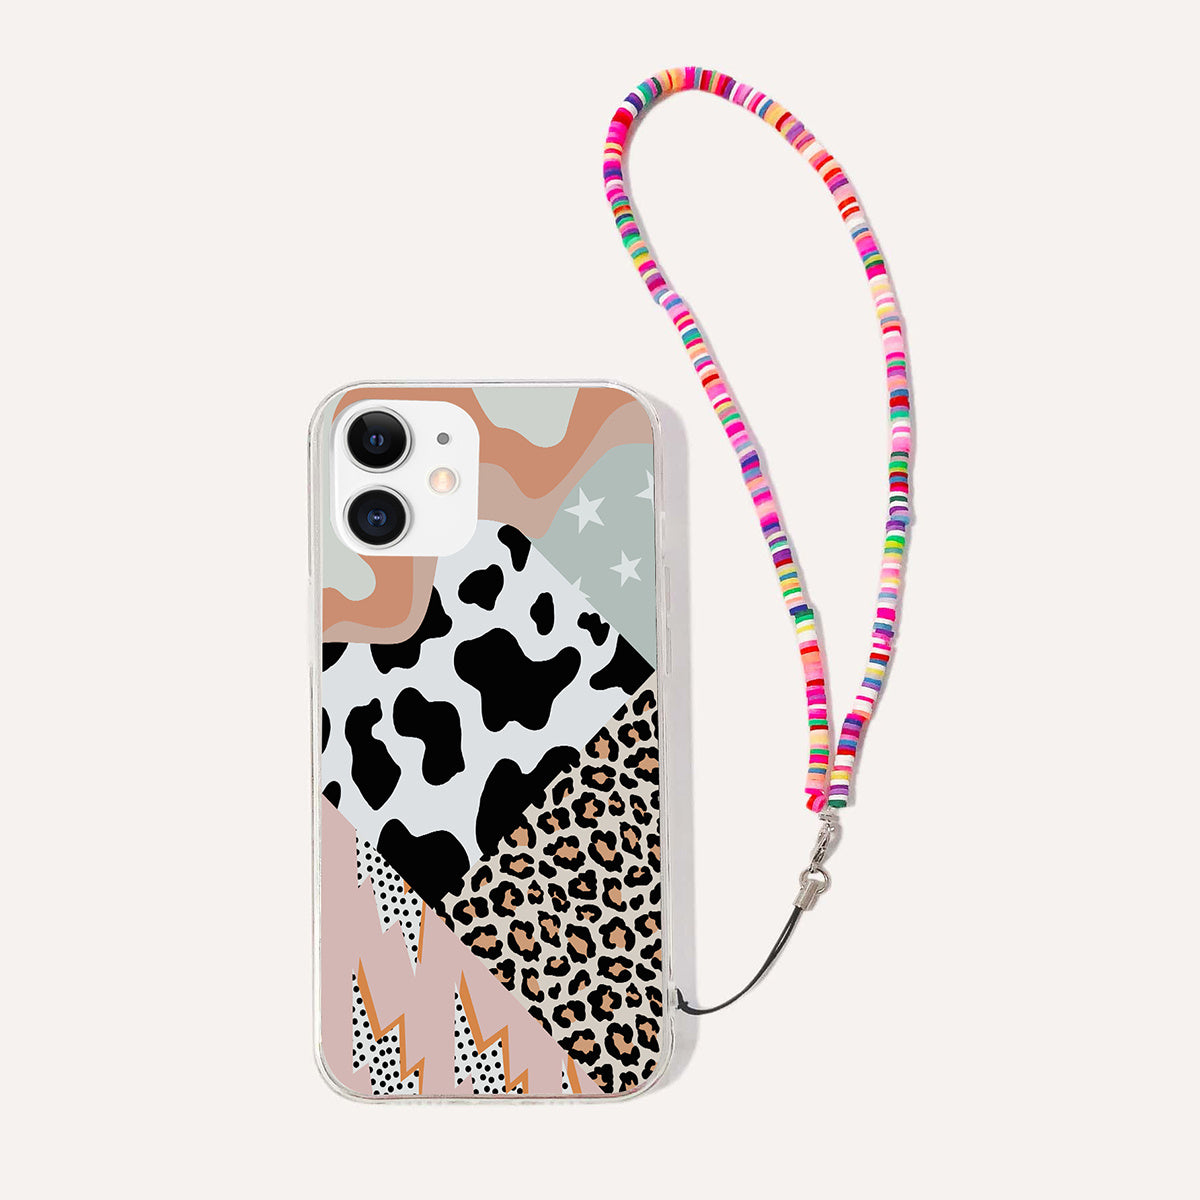 Leopard Phone Case With Colorful Wristband